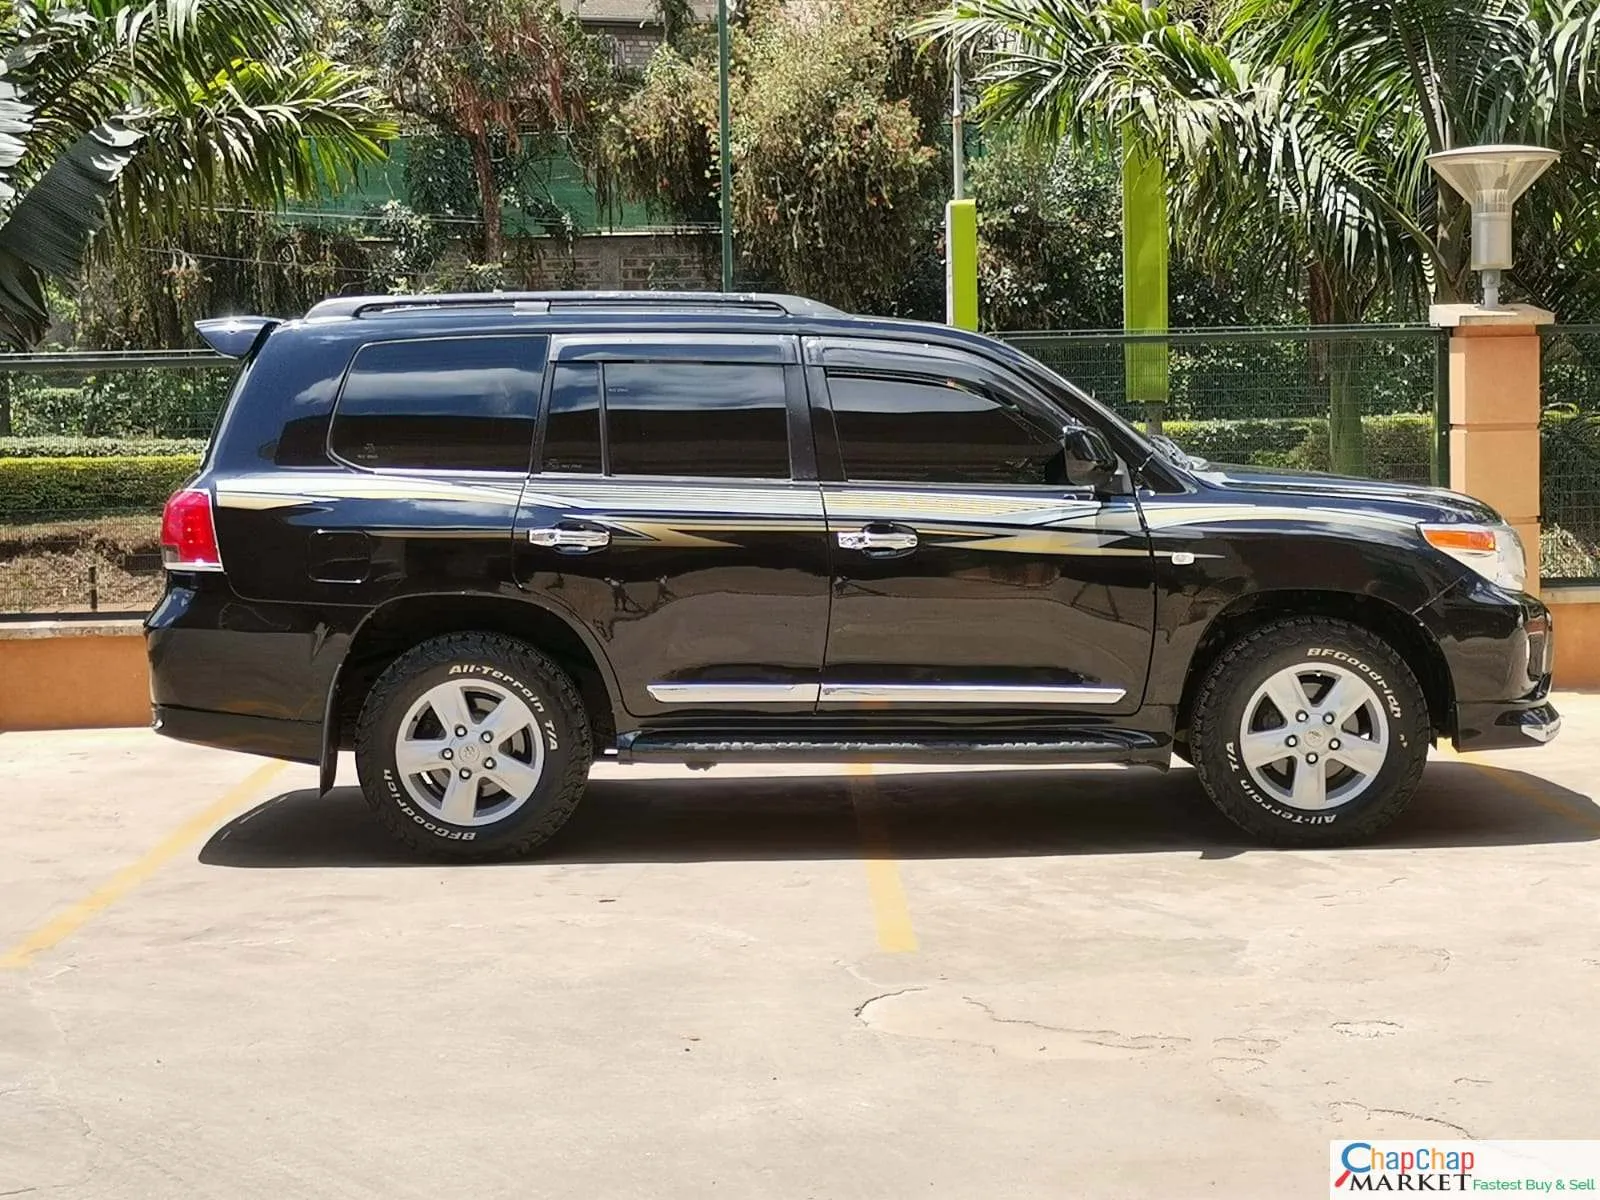 Cars Cars For Sale-Toyota Land cruiser V8 200 series 3.3M ONLY TRADE IN OK EXCLUSIVE v8 for Sale in Kenya hire purchase installments 9